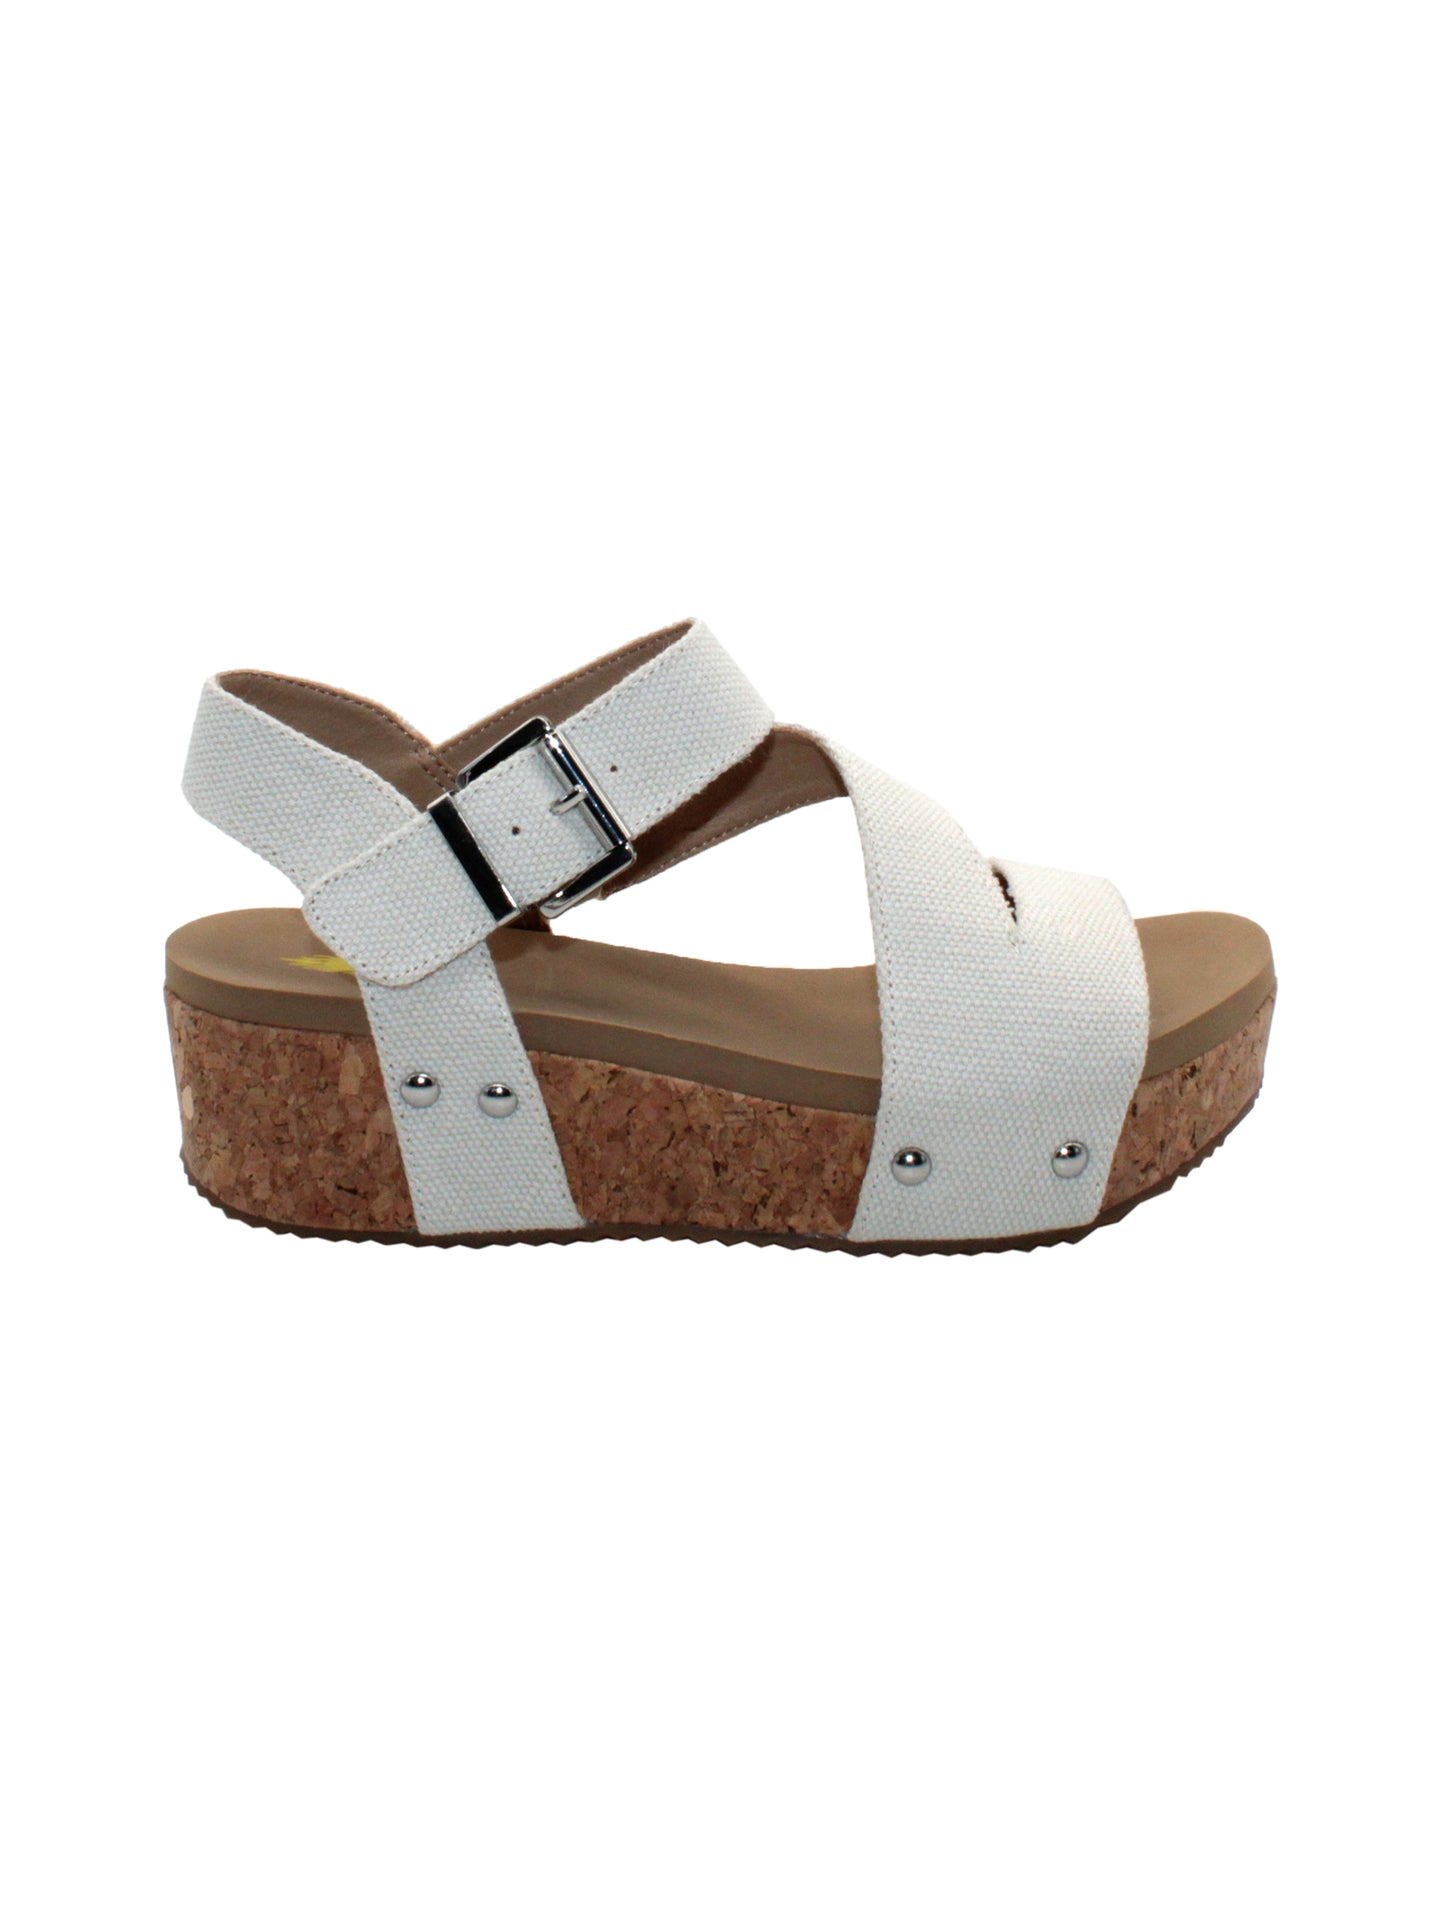 Vegan leather or heavy canvas asymmetrical upper Synthetic lining Adjustable metal buckle and metal clog studs Asymmetrical sandal with back strap Ultra comfort EVA insole Cork wedge Rubber traction outsole Approx. 2” heel height ivory side